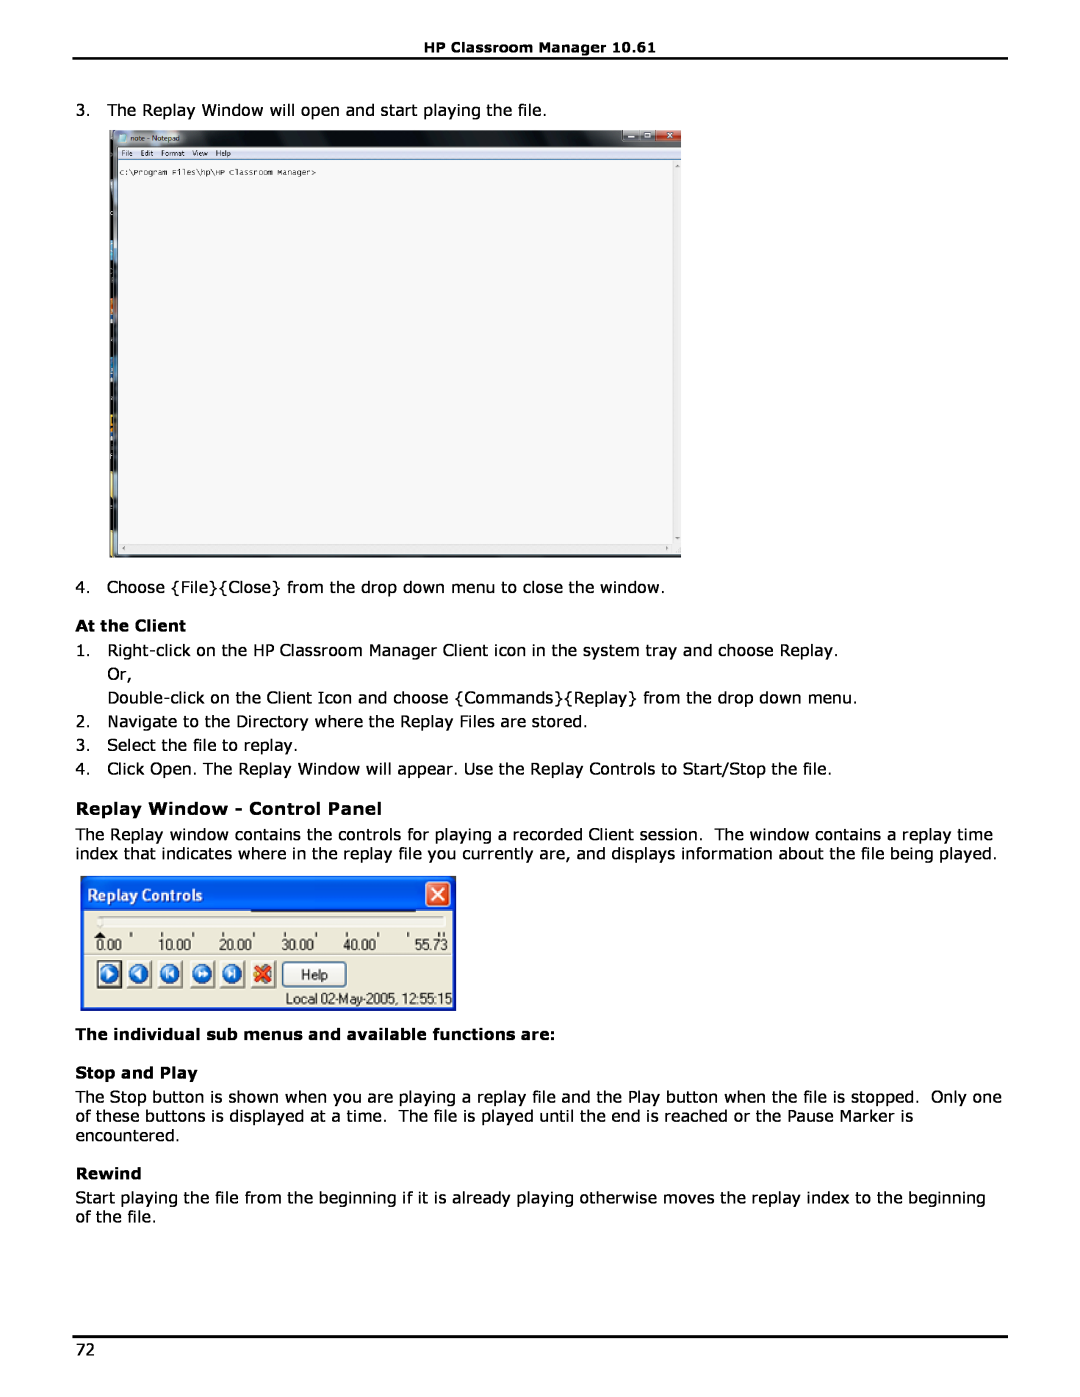 HP Classroom Manager manual Replay Window - Control Panel, At the Client, Rewind 